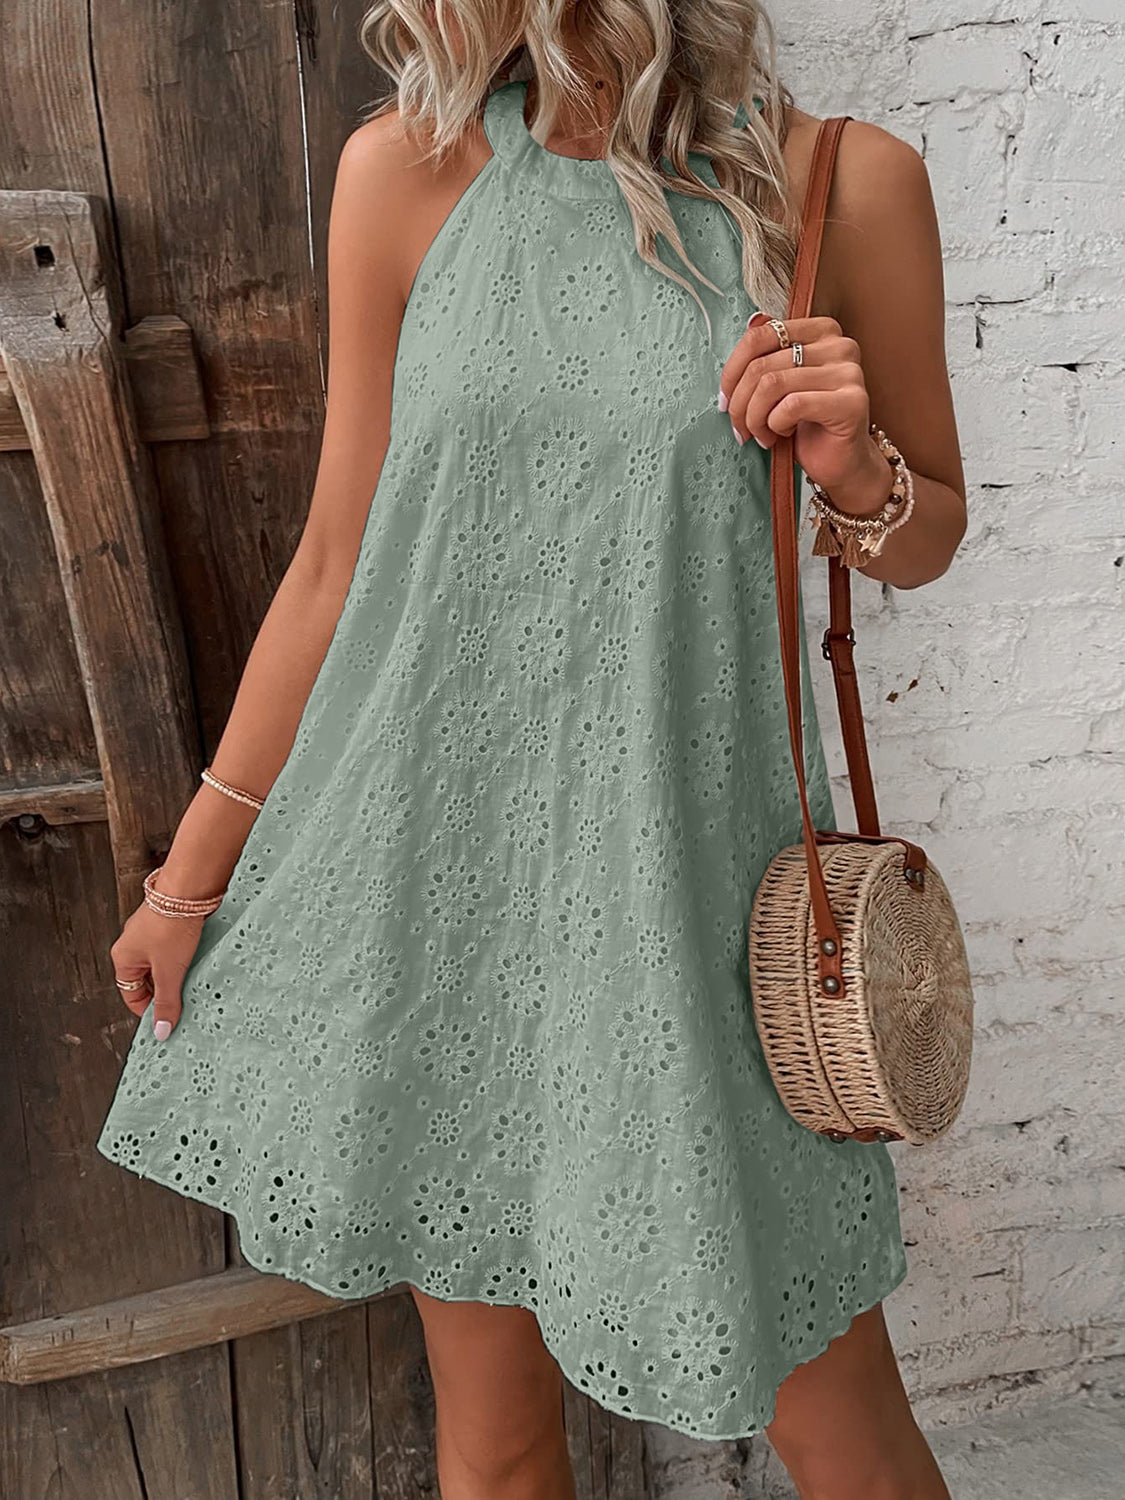 Eyelet Grecian Neck Mini Dress [ click for additional color options]